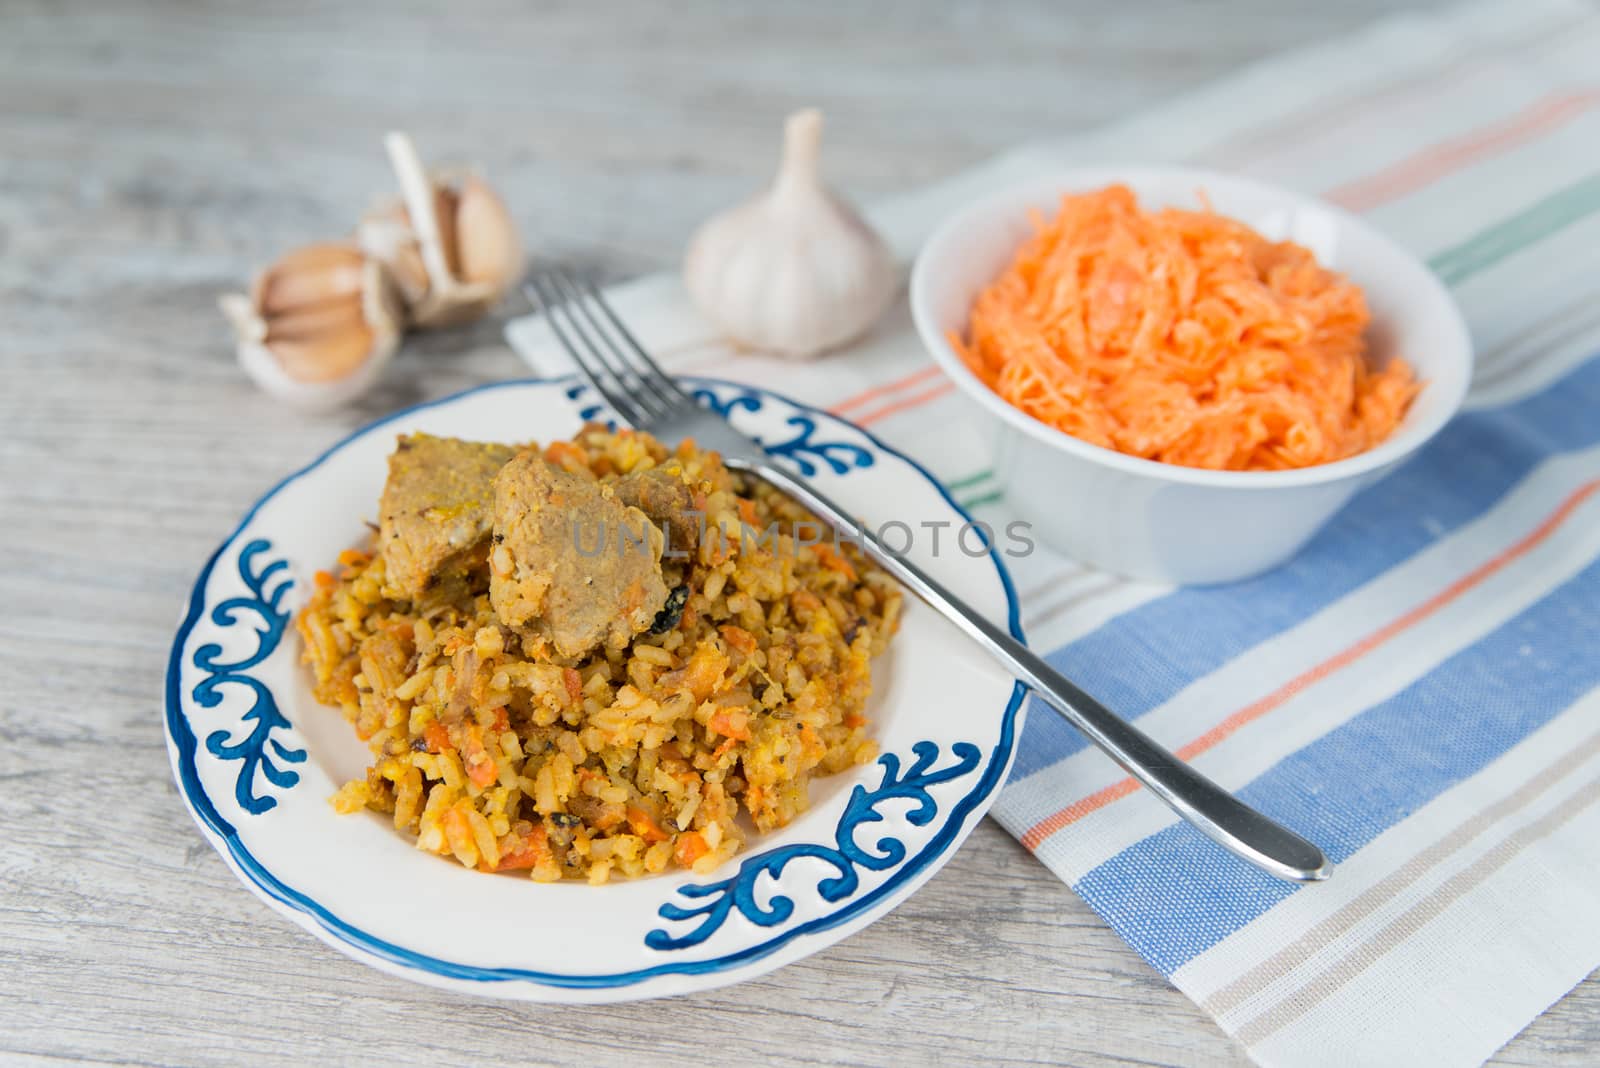 Plate of rice and meat national dish pilau with carrot salad